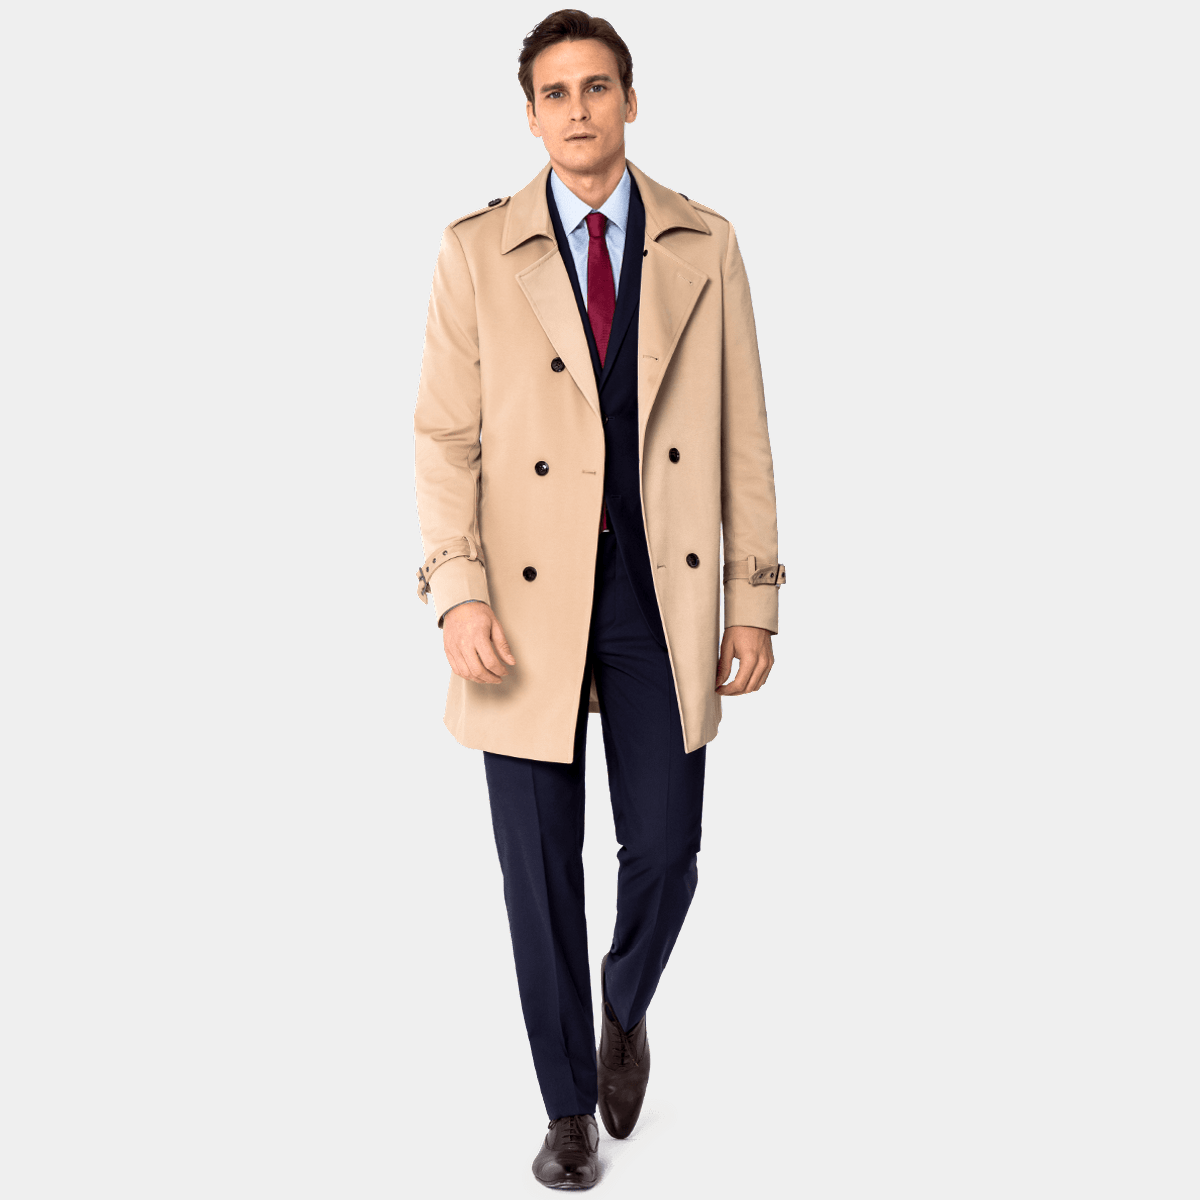 Tailored Trench Coats for Men £159 - Hockerty